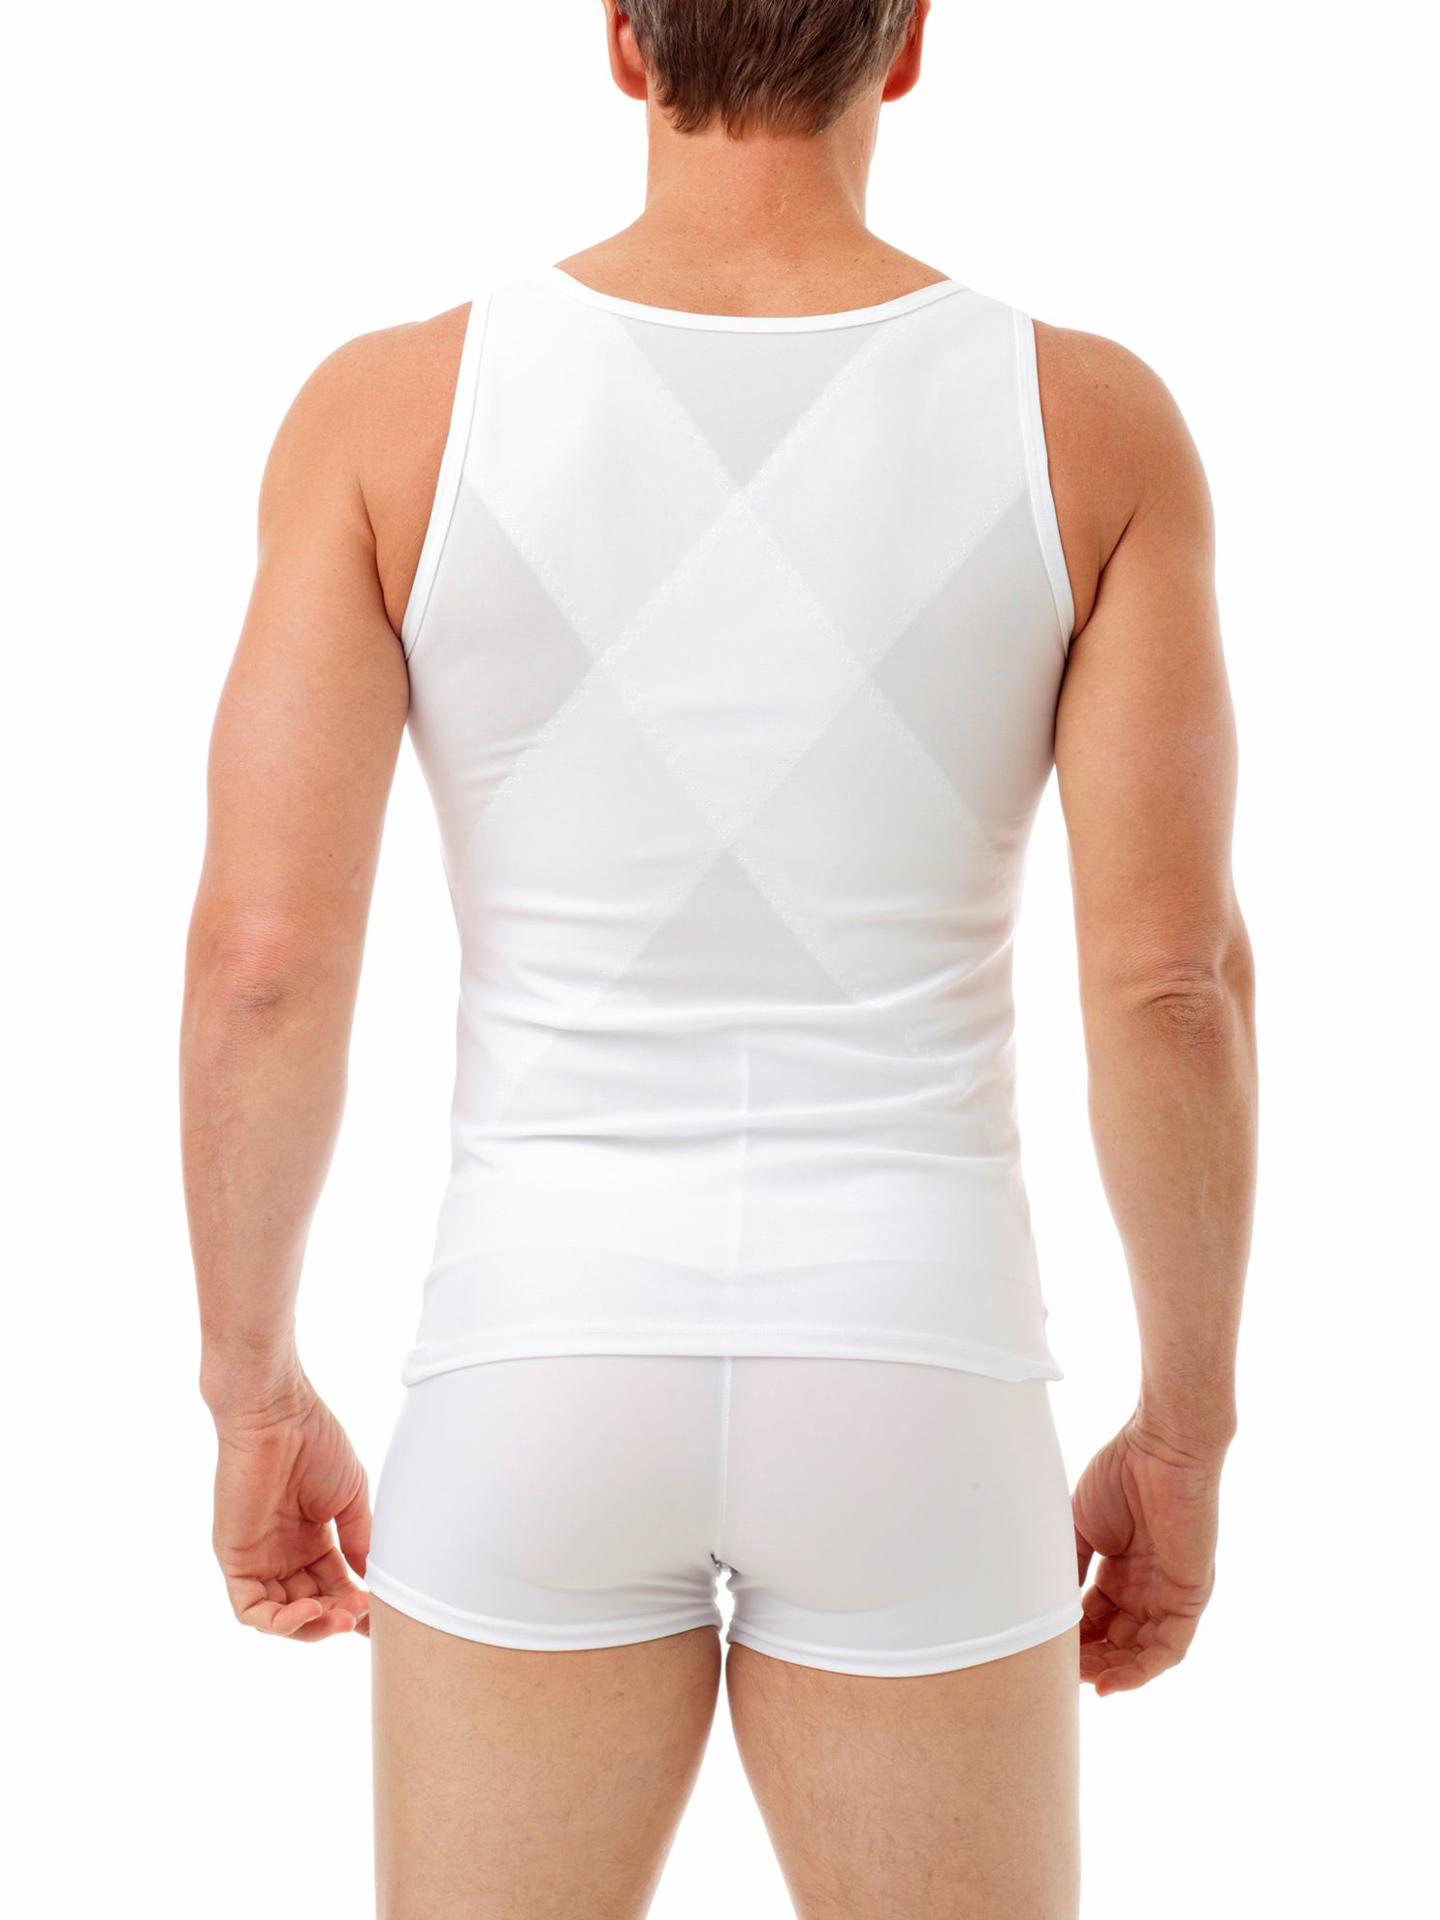 Cotton Compression Concealer Tank Top, Free Shipping on Orders $75+